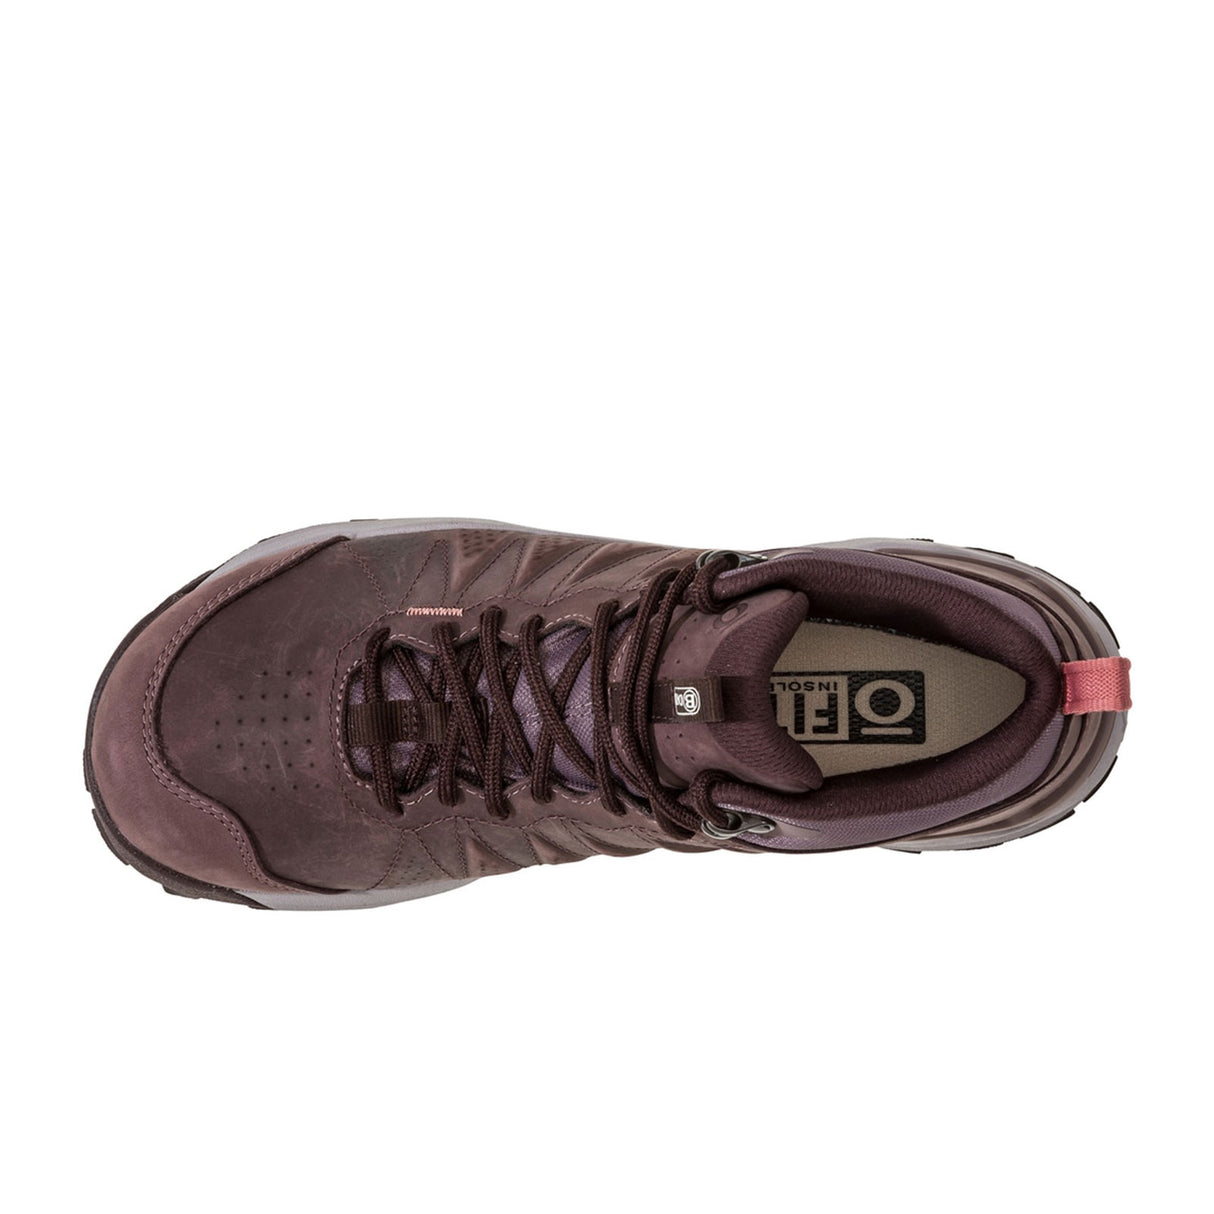 Oboz Sypes Low Leather B-DRY Hiking Shoe (Women) - Peppercorn Hiking - Low - The Heel Shoe Fitters